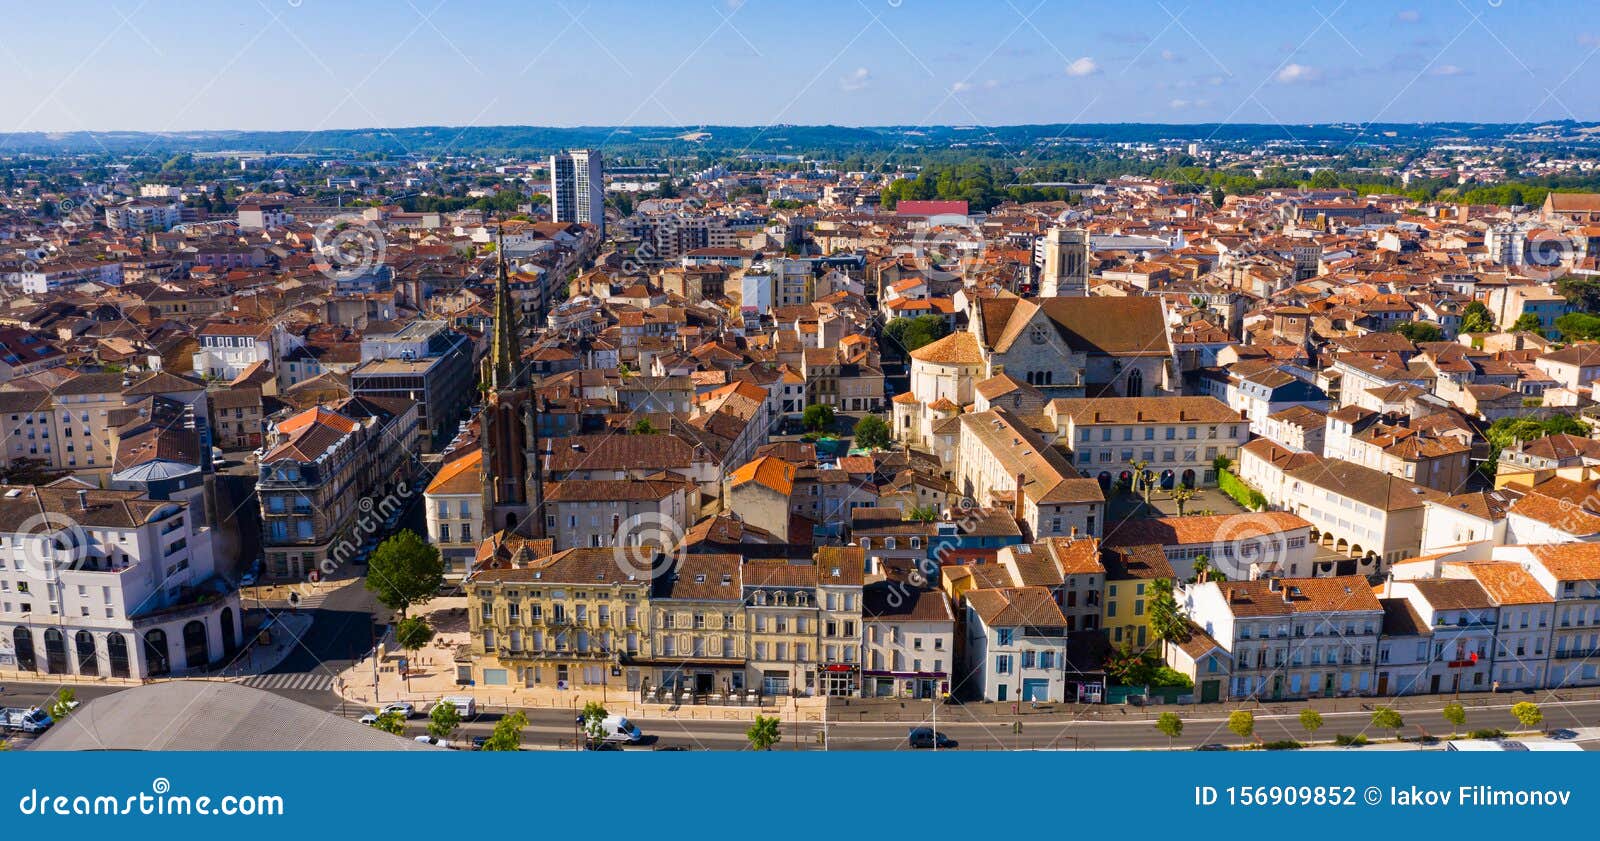 Aerial View On The City Agen France Stock Photo Image Of Historical